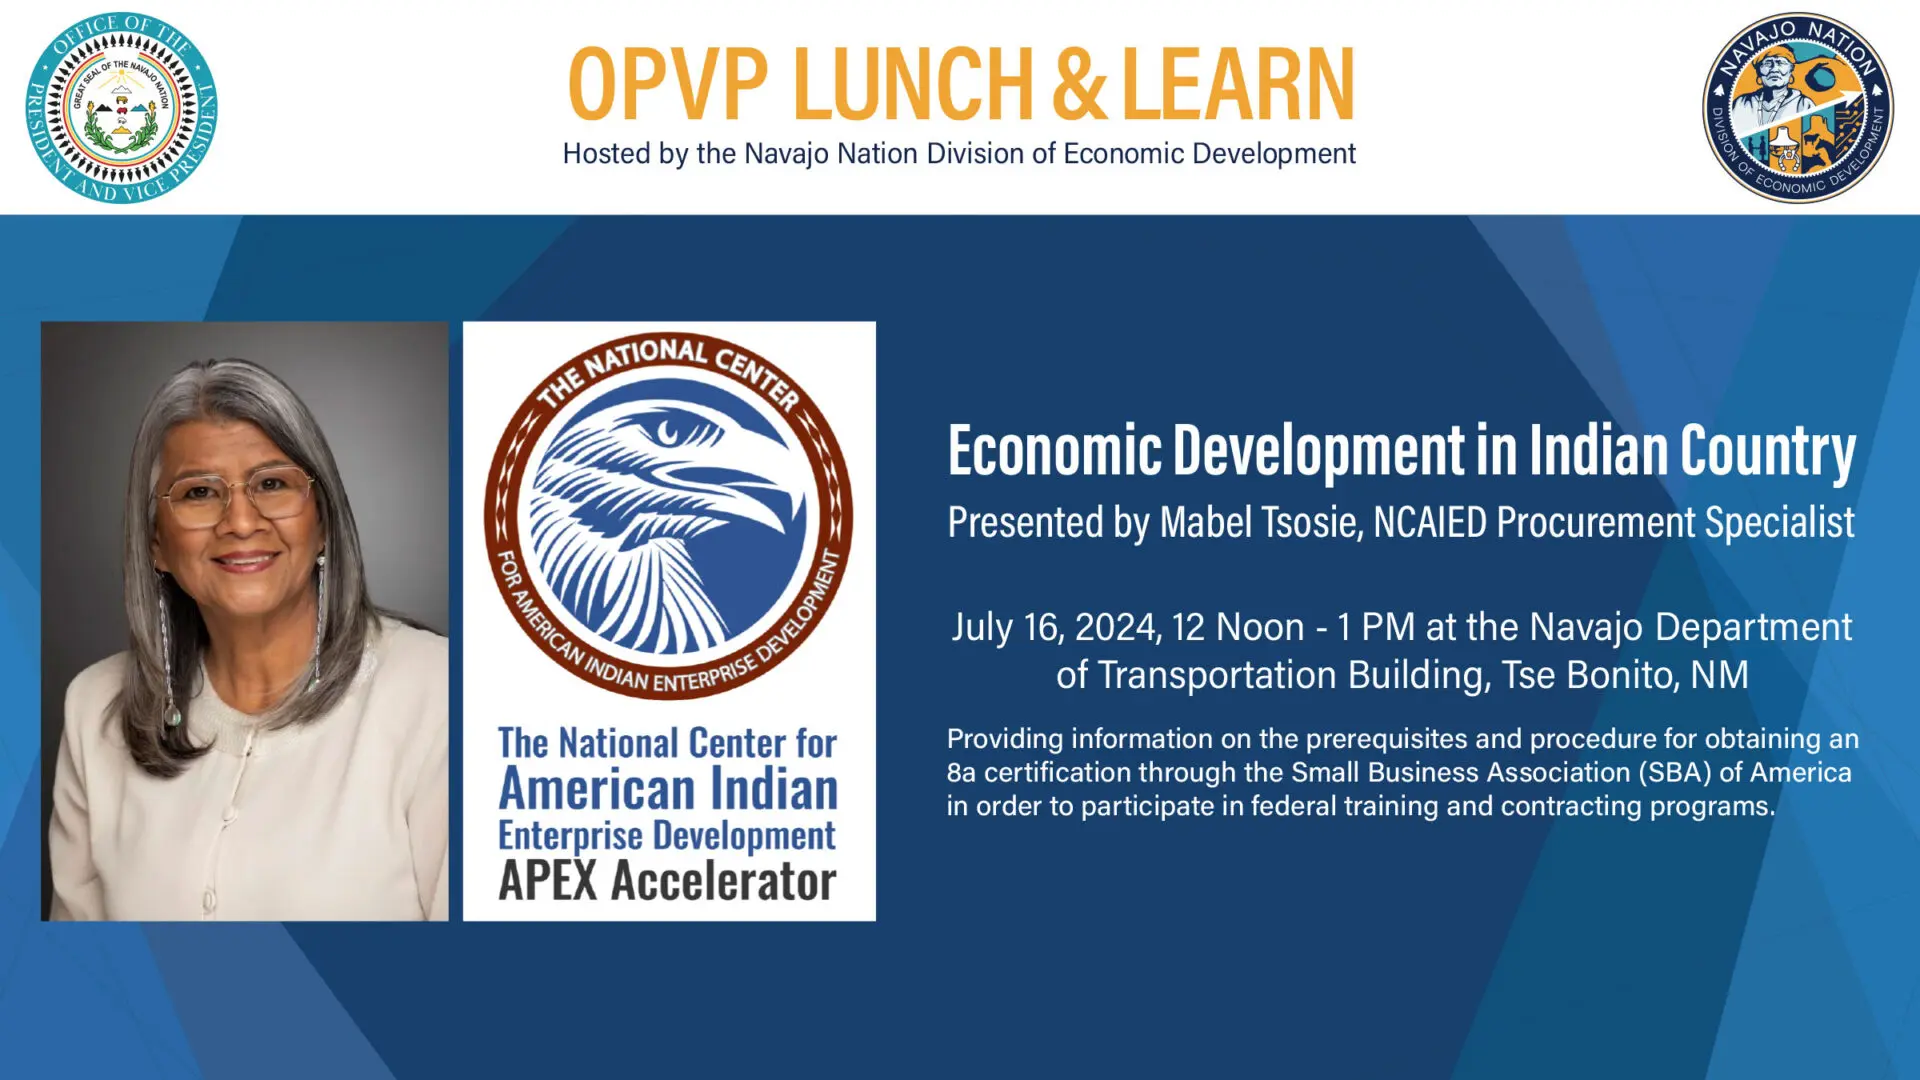 OPVP Lunch and Learn, Economic Development in Indian County presented by Mabel Tsosie, NCAIED Procurement Specialist, July 16, 2024 Noon - 1PM at the Navajo Department of Transportation Building, Tse Bonito, NM.